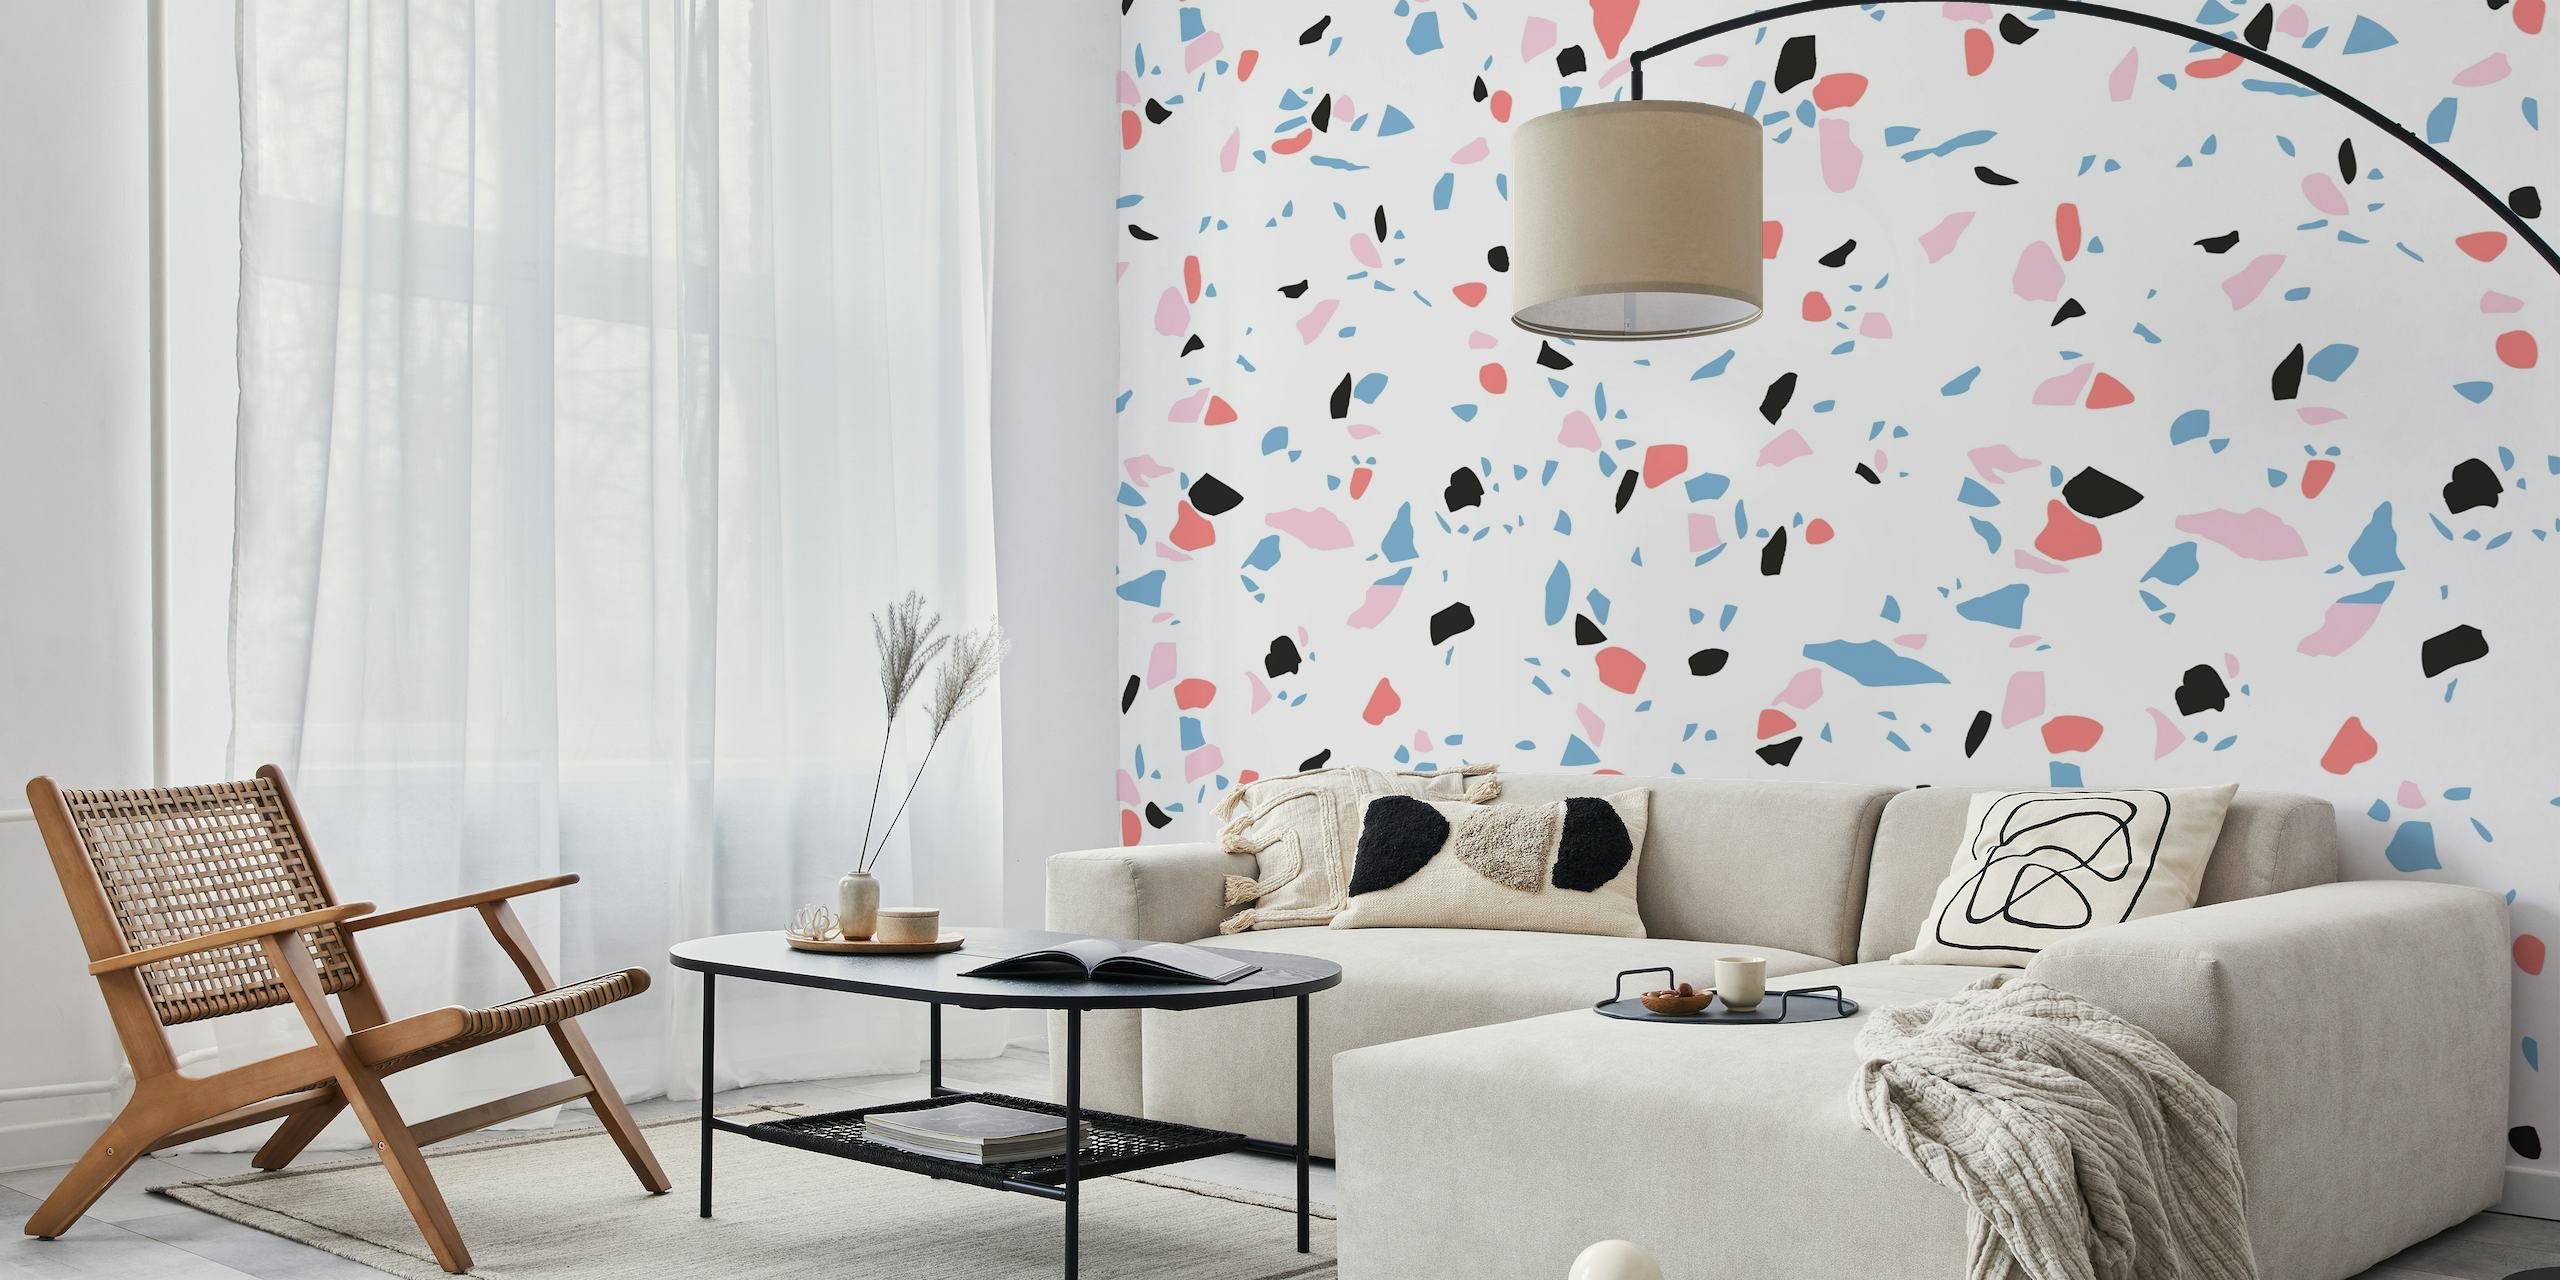 Terrazzo Style 1 wall mural with a white background and colorful abstract shapes